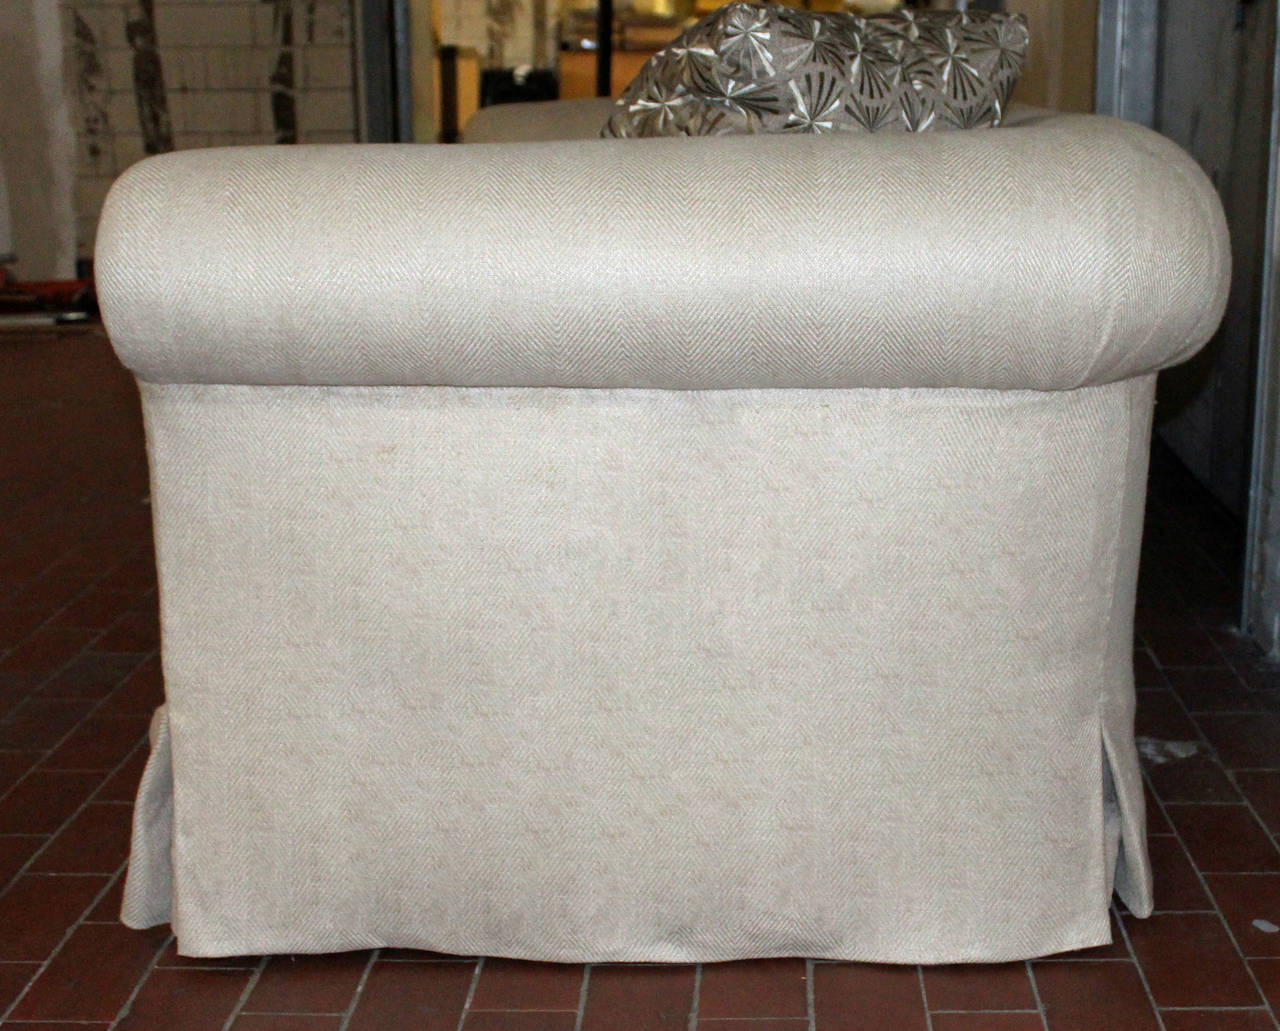 long, elegant and very comfortable rolled arm sofa in Oatmeal linen.  This sofa was recently reupholstered.  The seat cushions are all down/down feather as are the coordinating 